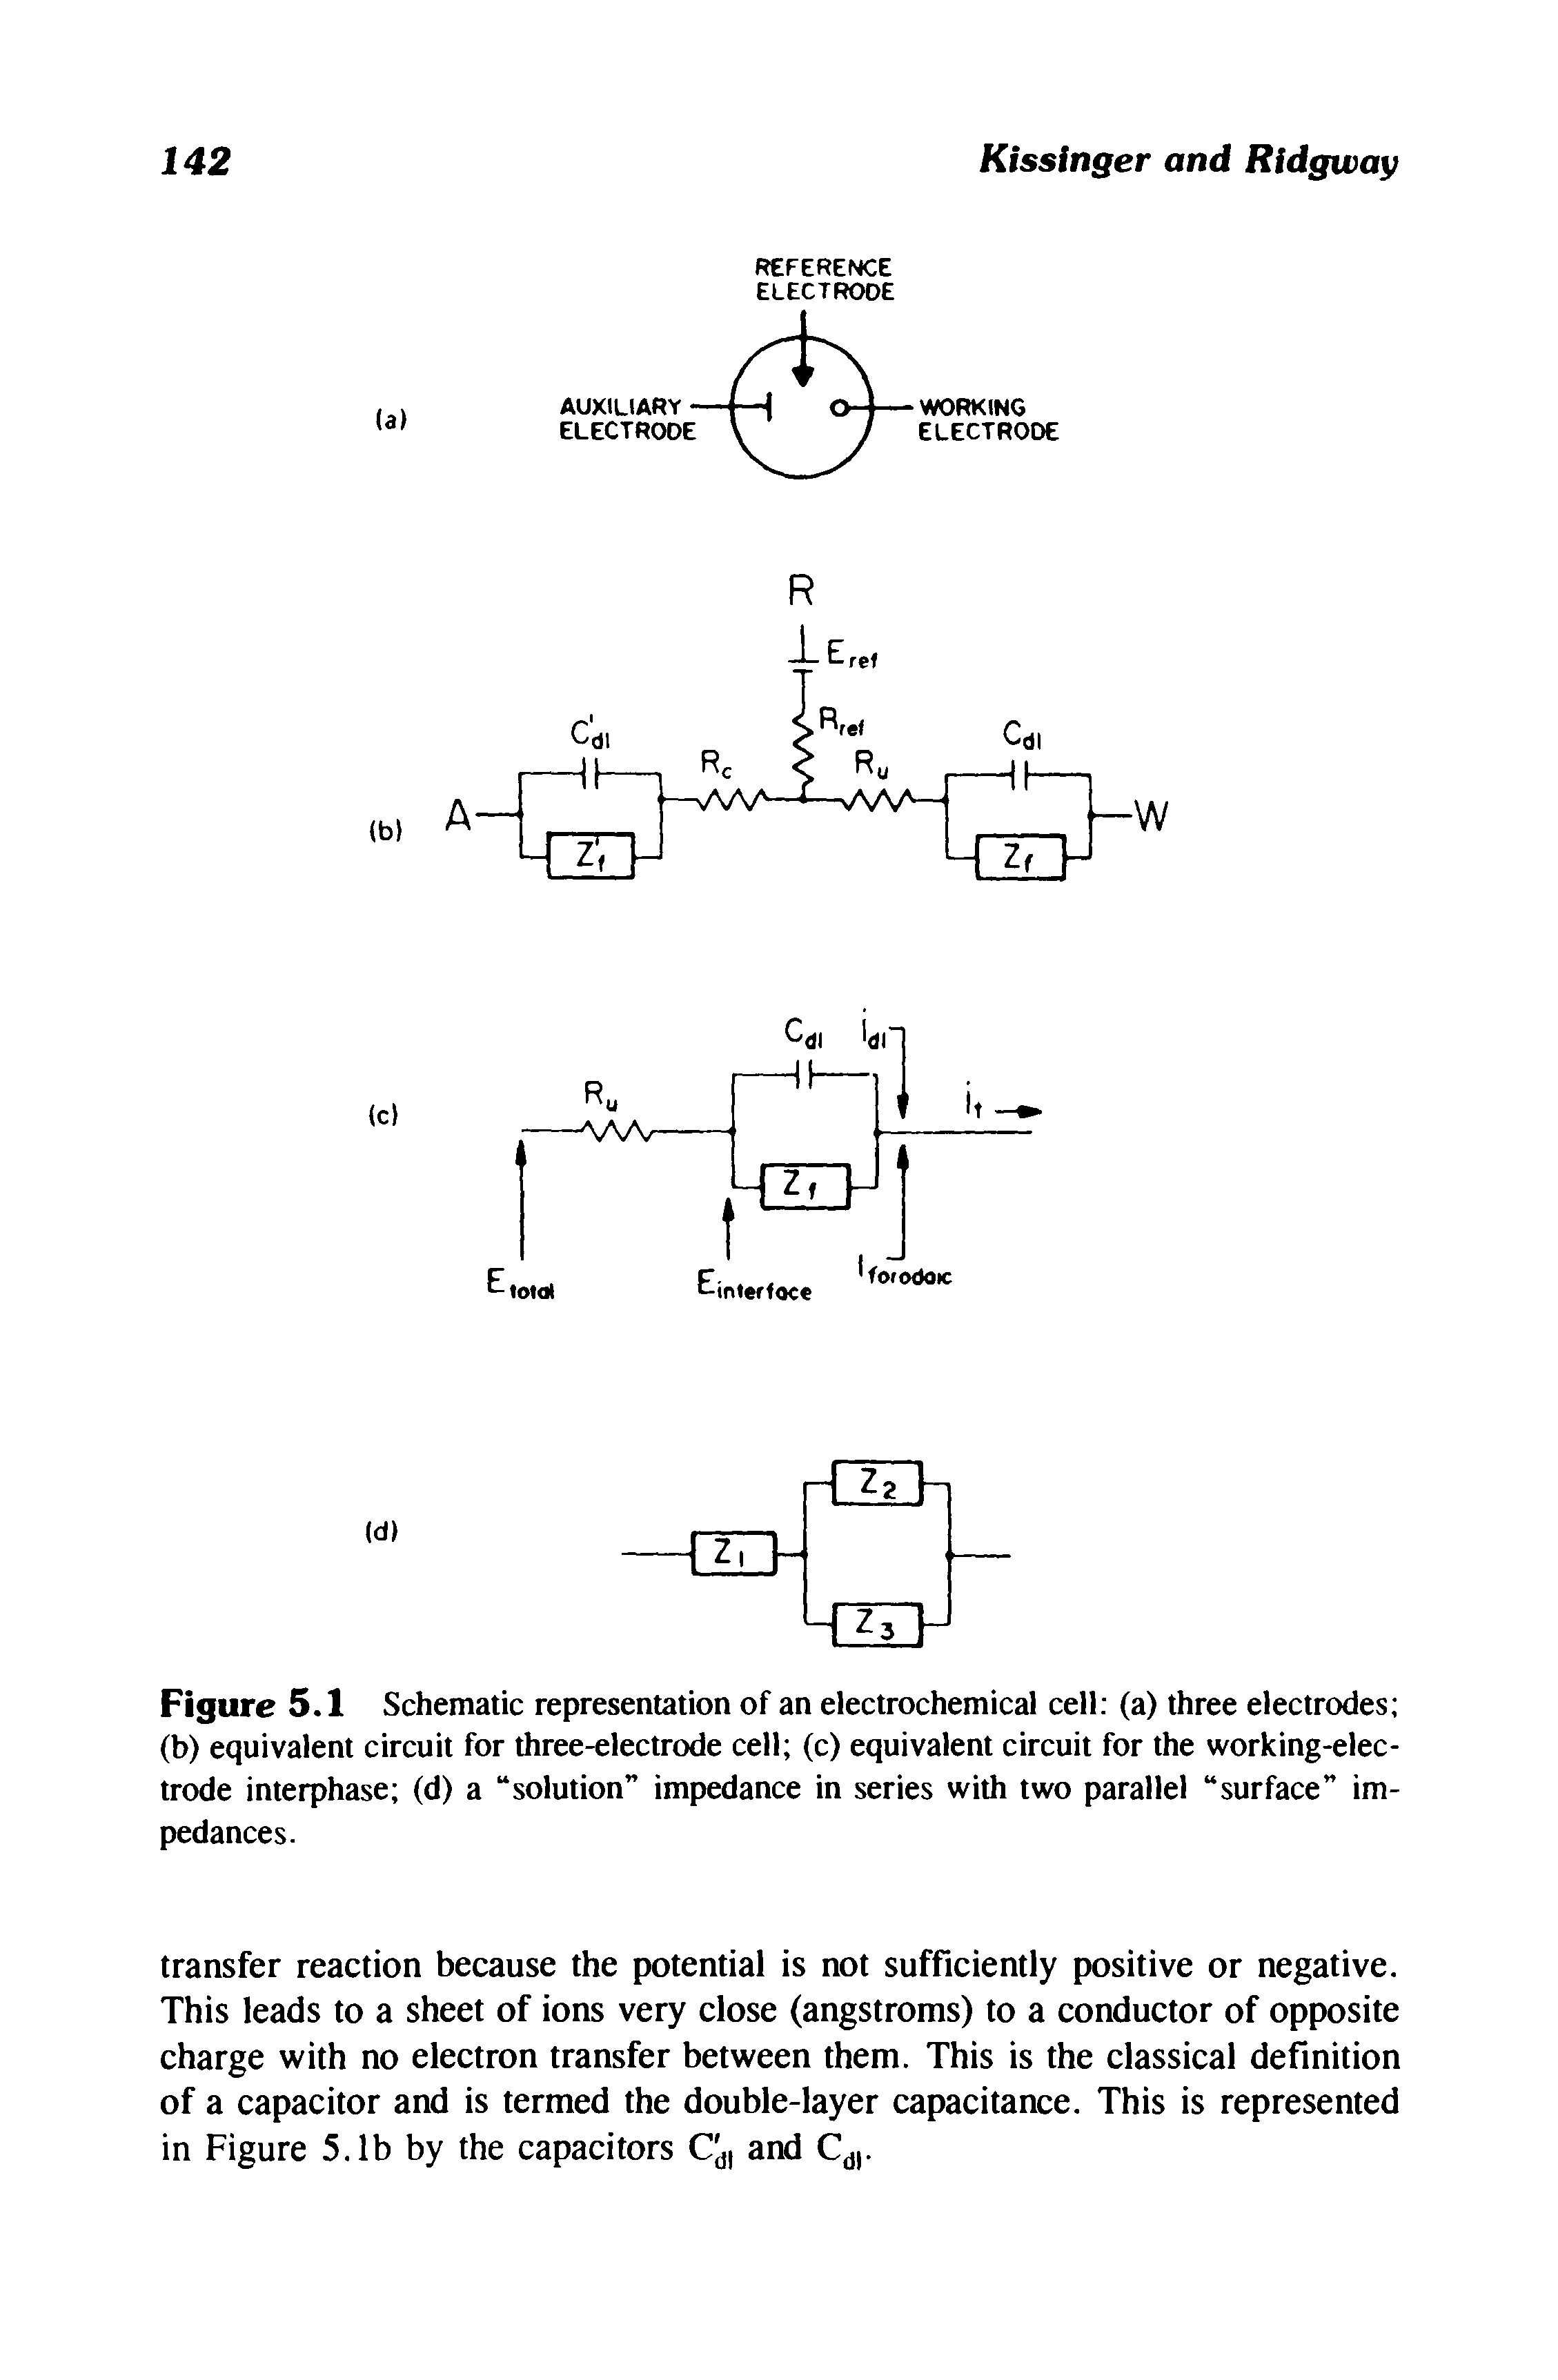 Figure 5.1 Schematic representation of an electrochemical cell (a) three electrodes (b) equivalent circuit for three-electrode cell (c) equivalent circuit for the working-electrode interphase (d) a solution impedance in series with two parallel surface impedances.